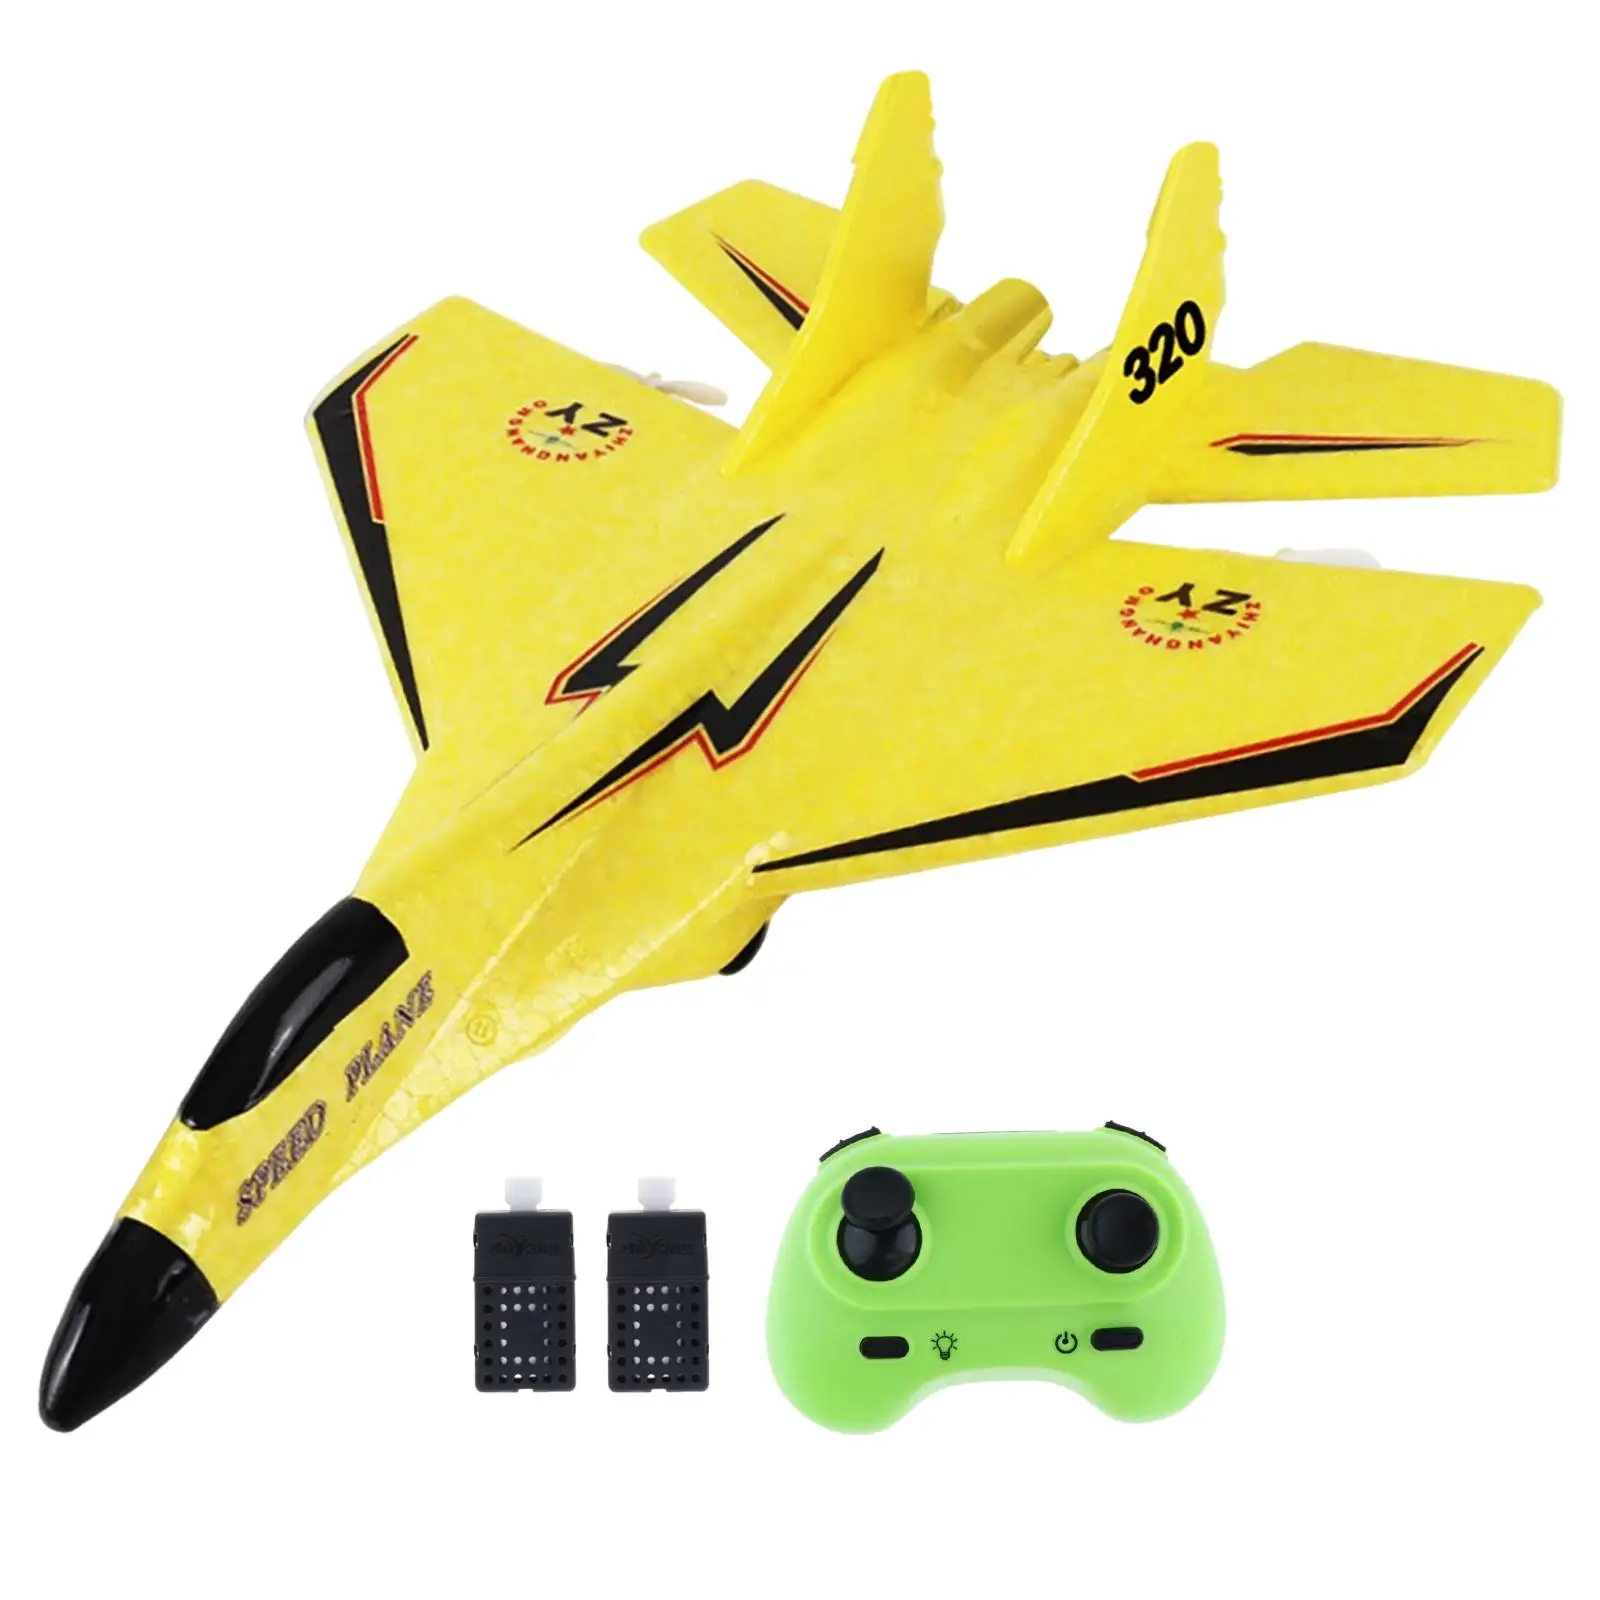 2 CH RC 2.4G Portable Easy to Control Gift Lightweight with Light 2 Channel RC Glider for Kids Boys Girls Beginner Adults